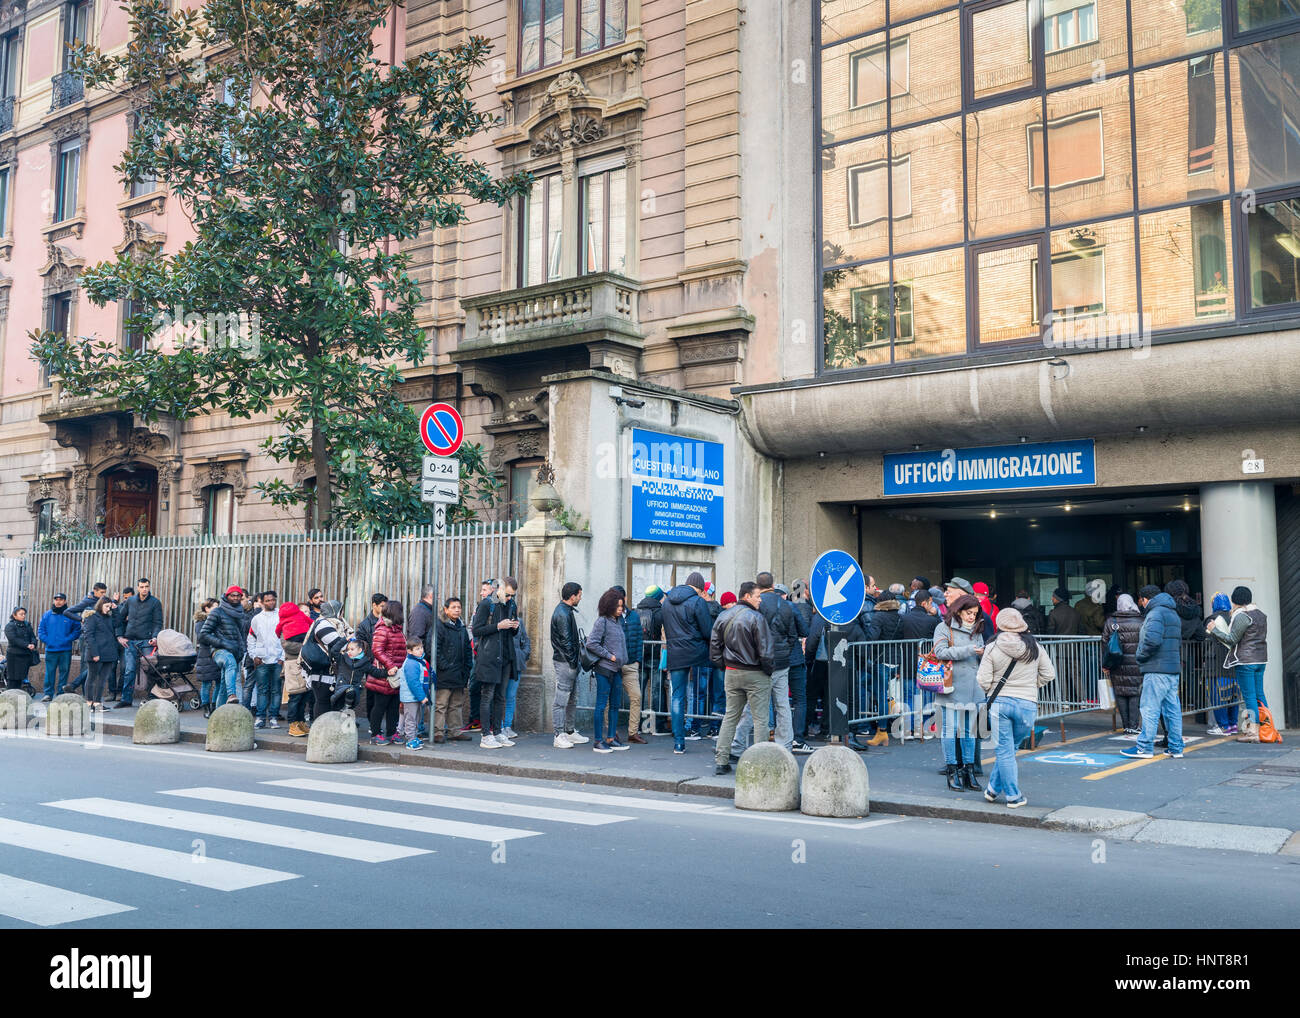 A queue for the Immigration Office in Milan, Italy. Italy is facing a refugee crisis due to ongoing wars in North Africa and the Middle East Stock Photo